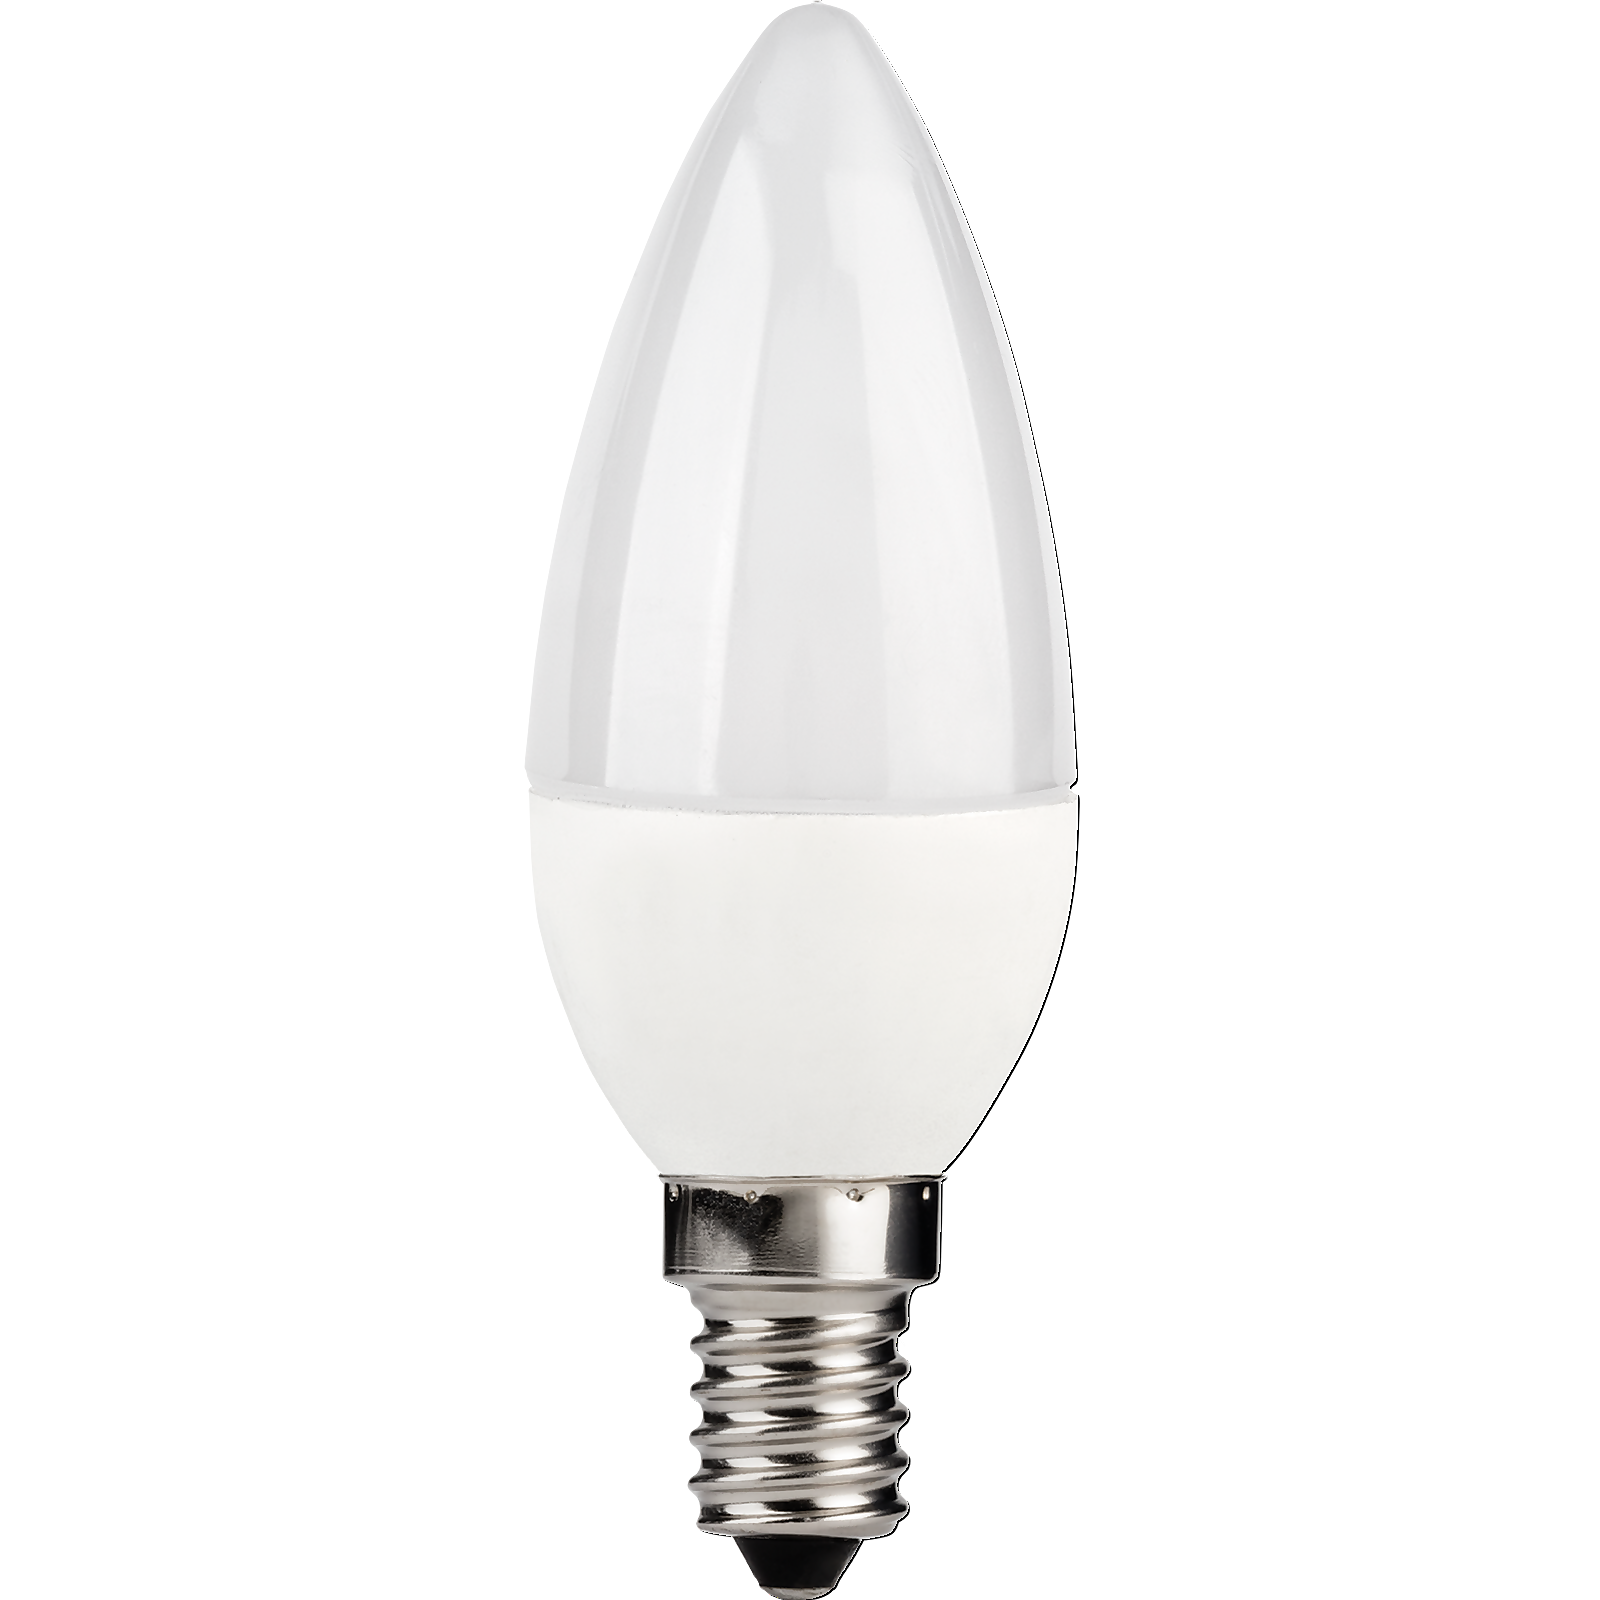 Photo of Tcp Led Candle 40w Ses Dimmable Warm White Bulb 1pk